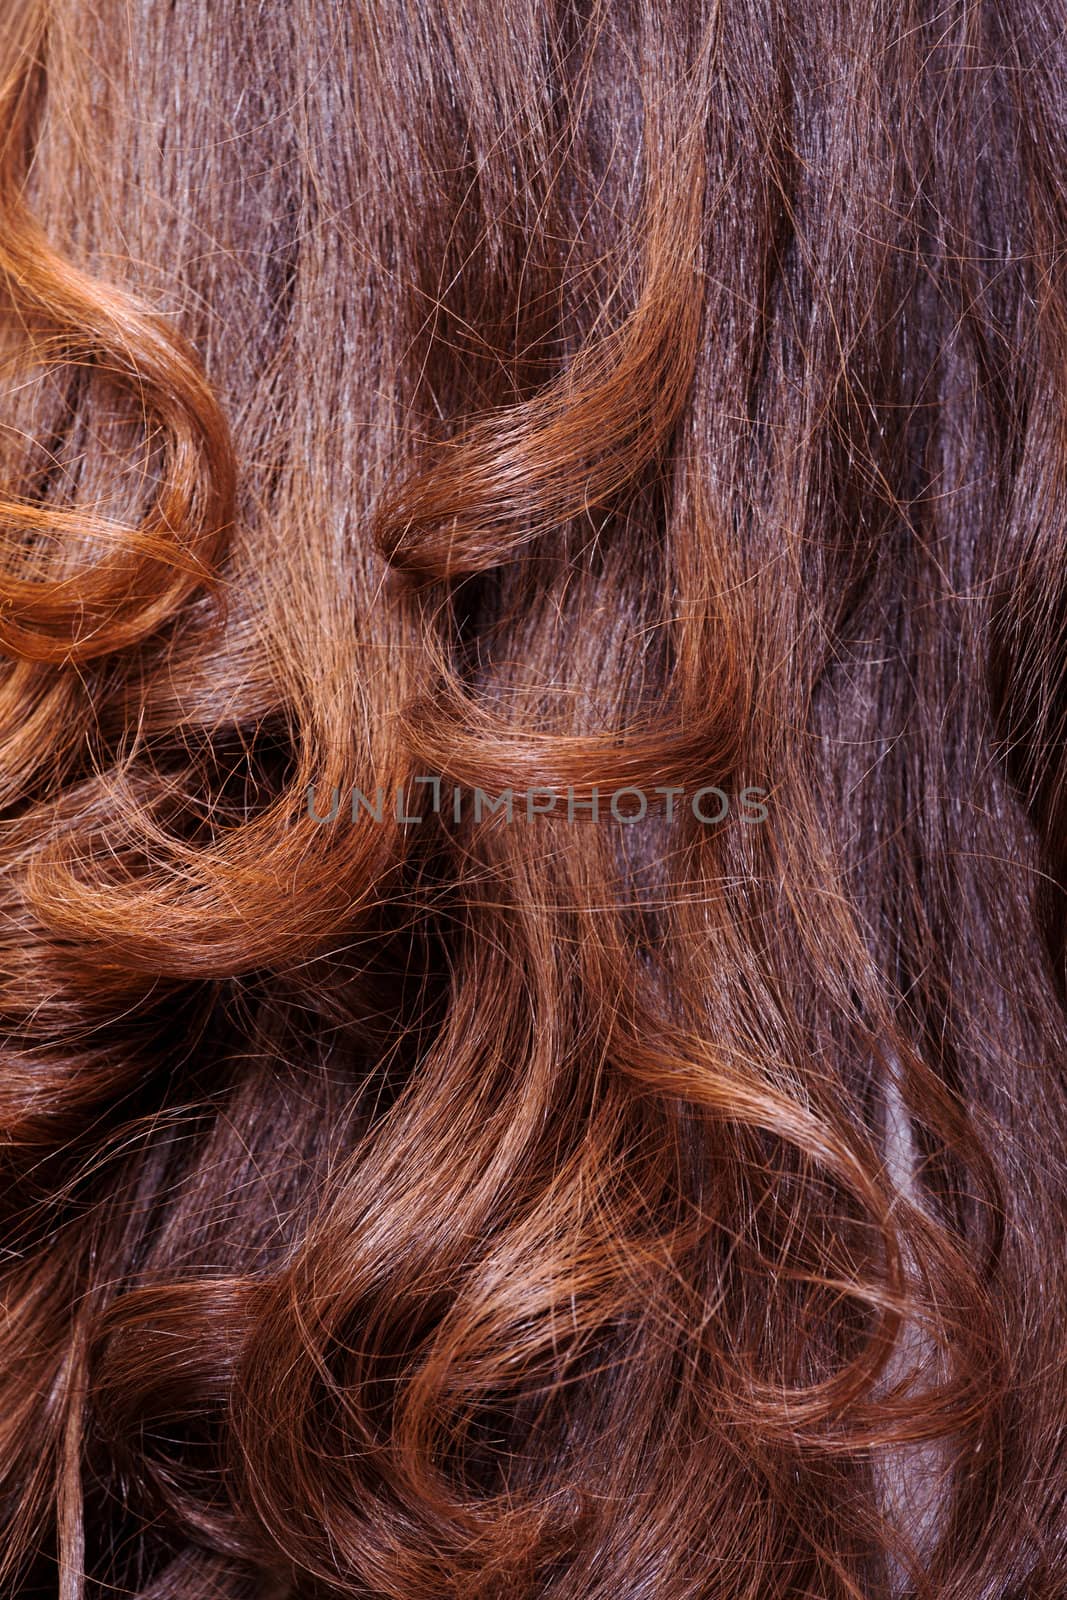 Background of long healthy shiny wavy auburn or brunette hair, studio shot of the back of a female head